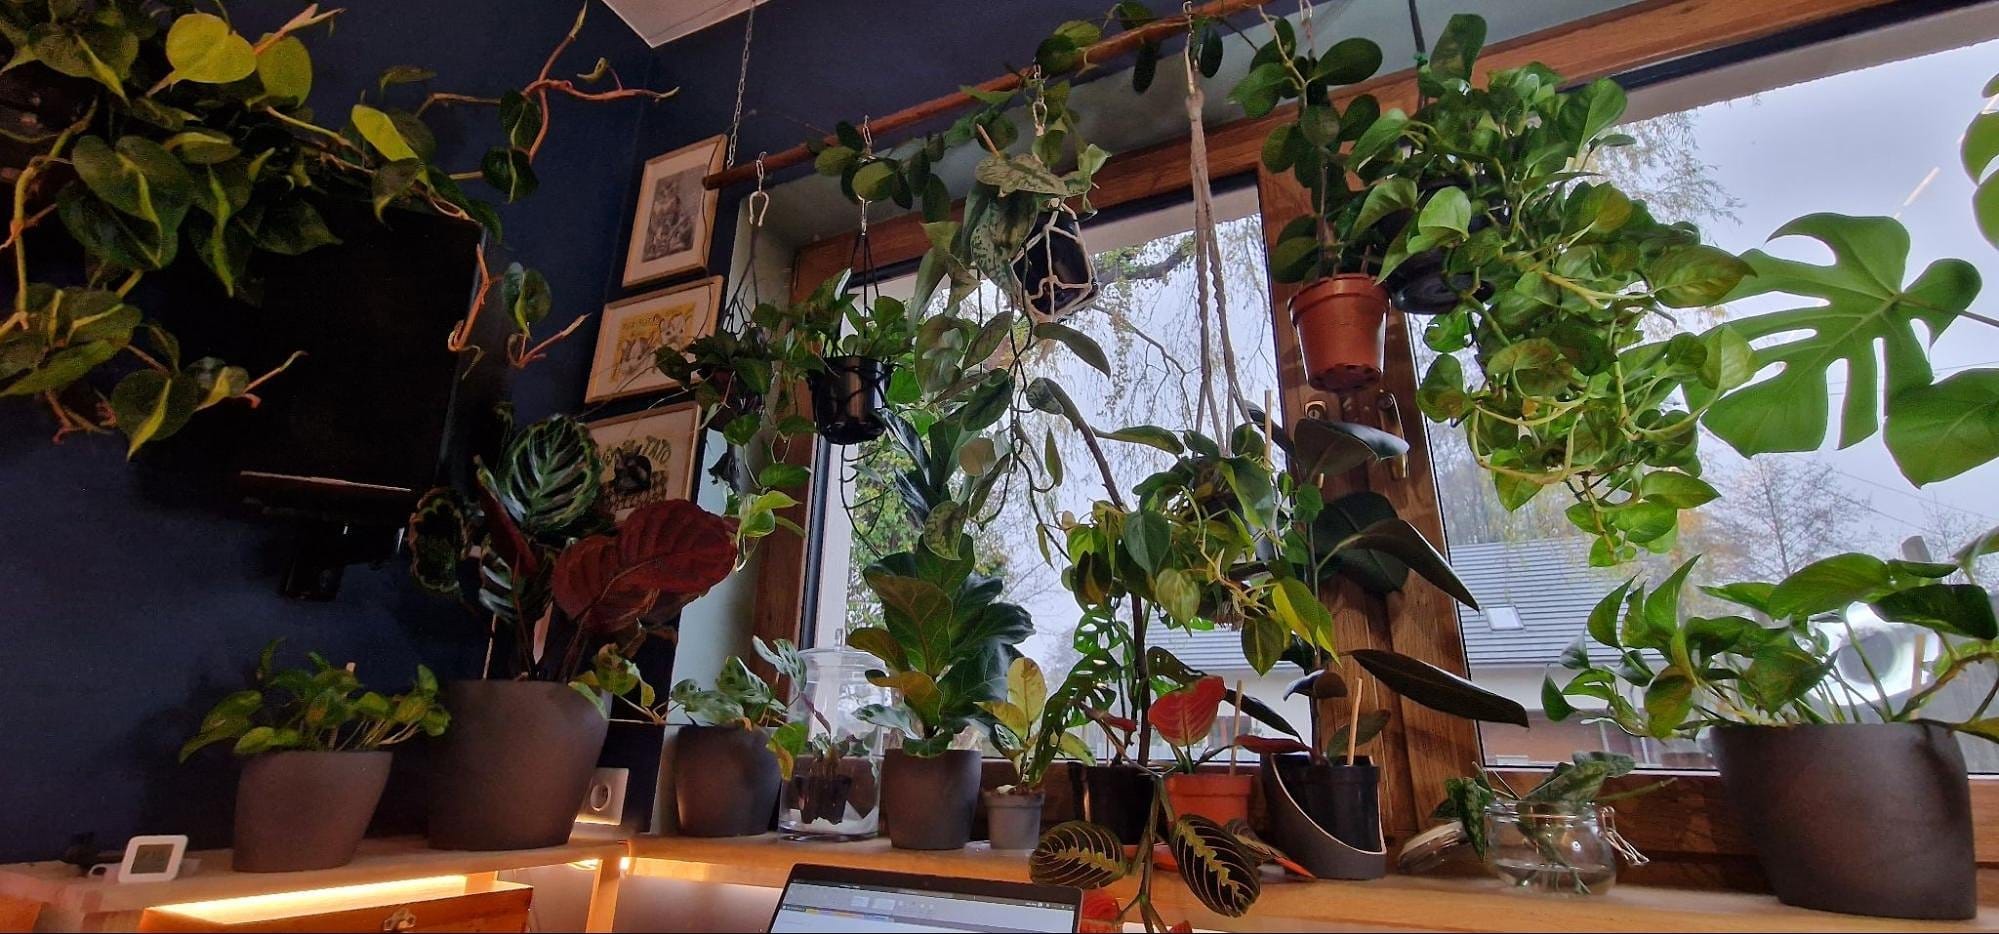  A vibrant window nook filled with a variety of indoor plants hanging and placed on shelves, with natural light streaming through to highlight the greenery against a dark blue wall